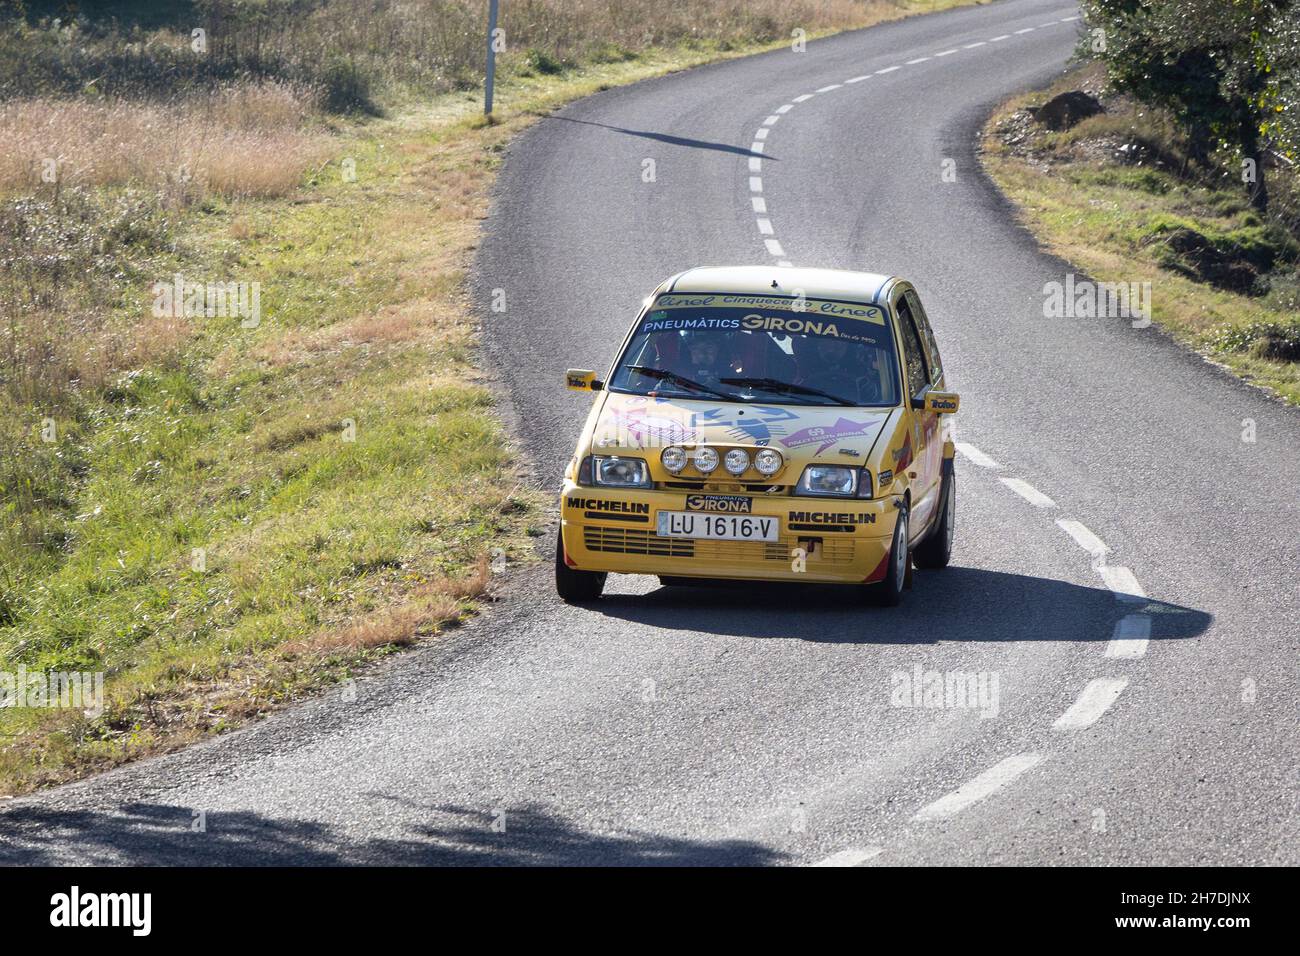 Fiat Cinquecento taking part in the timed section of the Rally Costa Brava 2021 in Girona, Spain Stock Photo